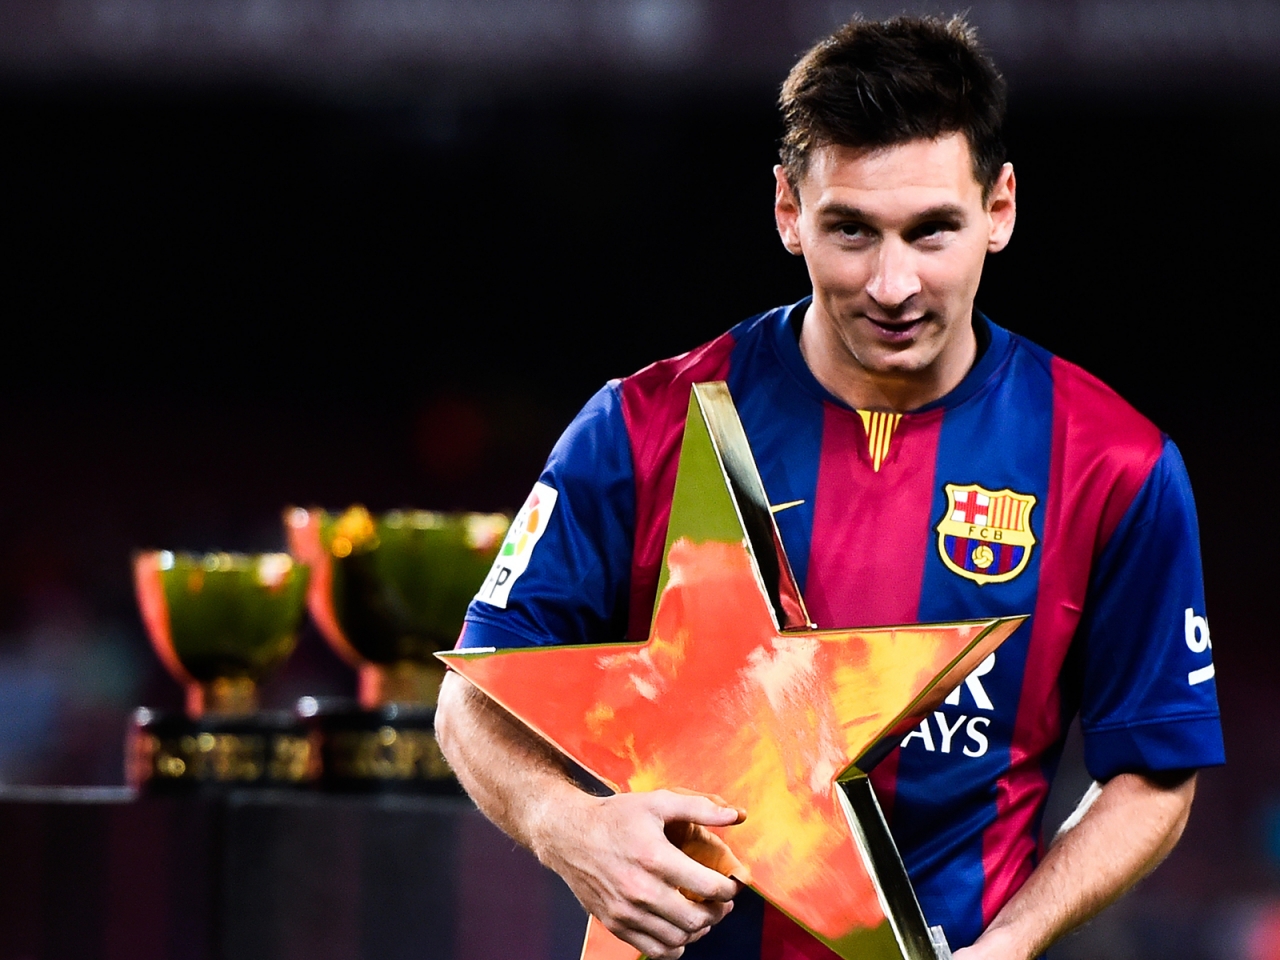 Messi Star Shaped Award for 1280 x 960 resolution